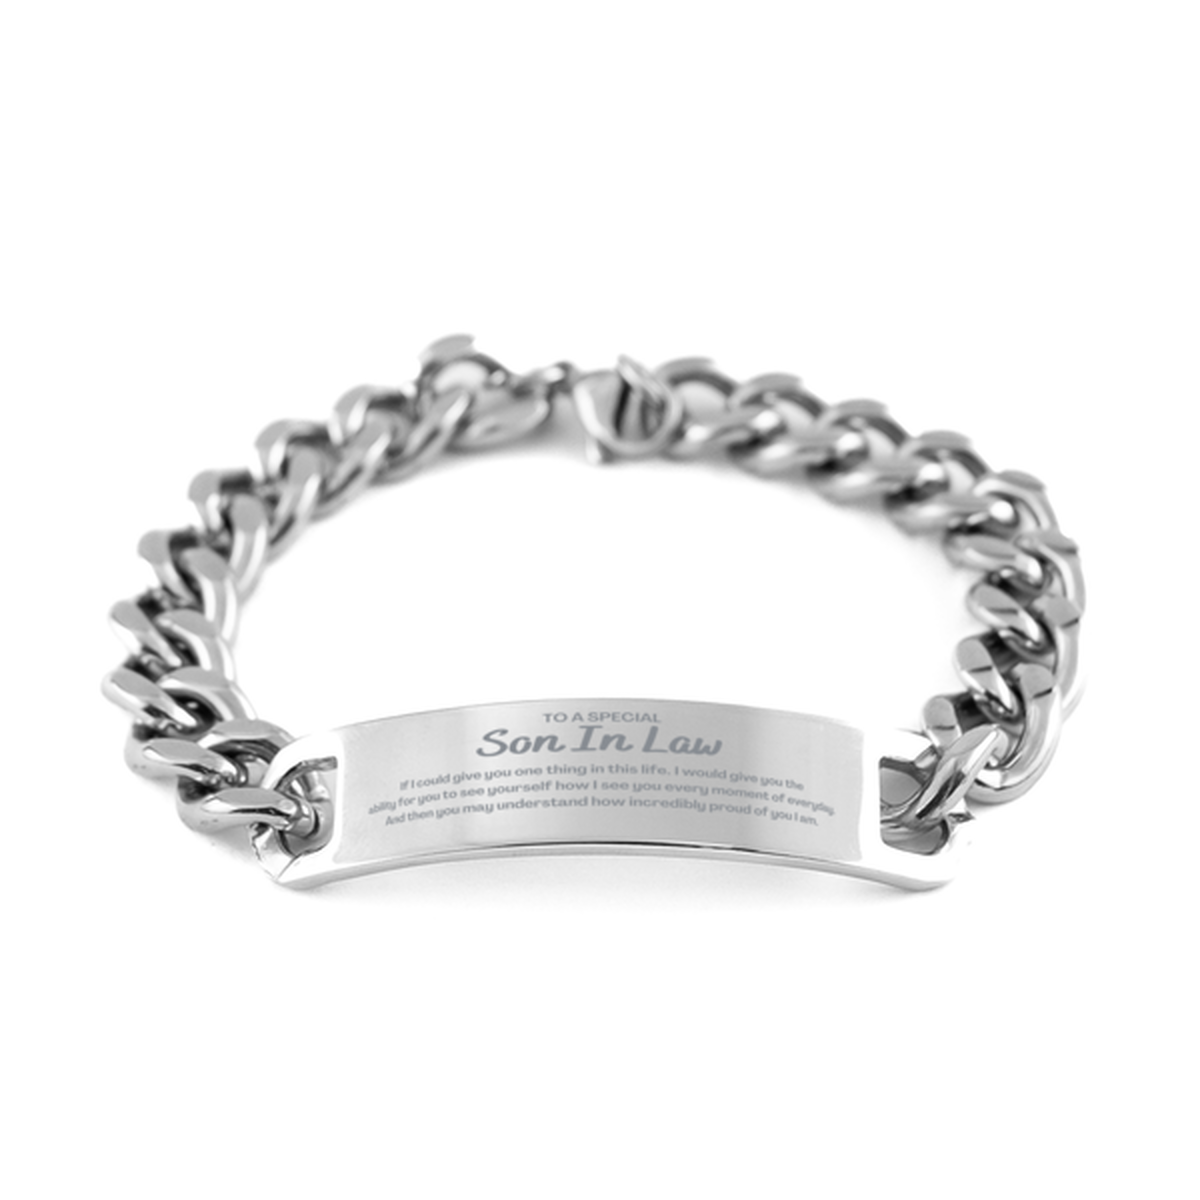 To My Son In Law Cuban Chain Stainless Steel Bracelet, Gifts For Son In Law Engraved, Inspirational Gifts for Christmas Birthday, Epic Gifts for Son In Law To A Special Son In Law how incredibly proud of you I am